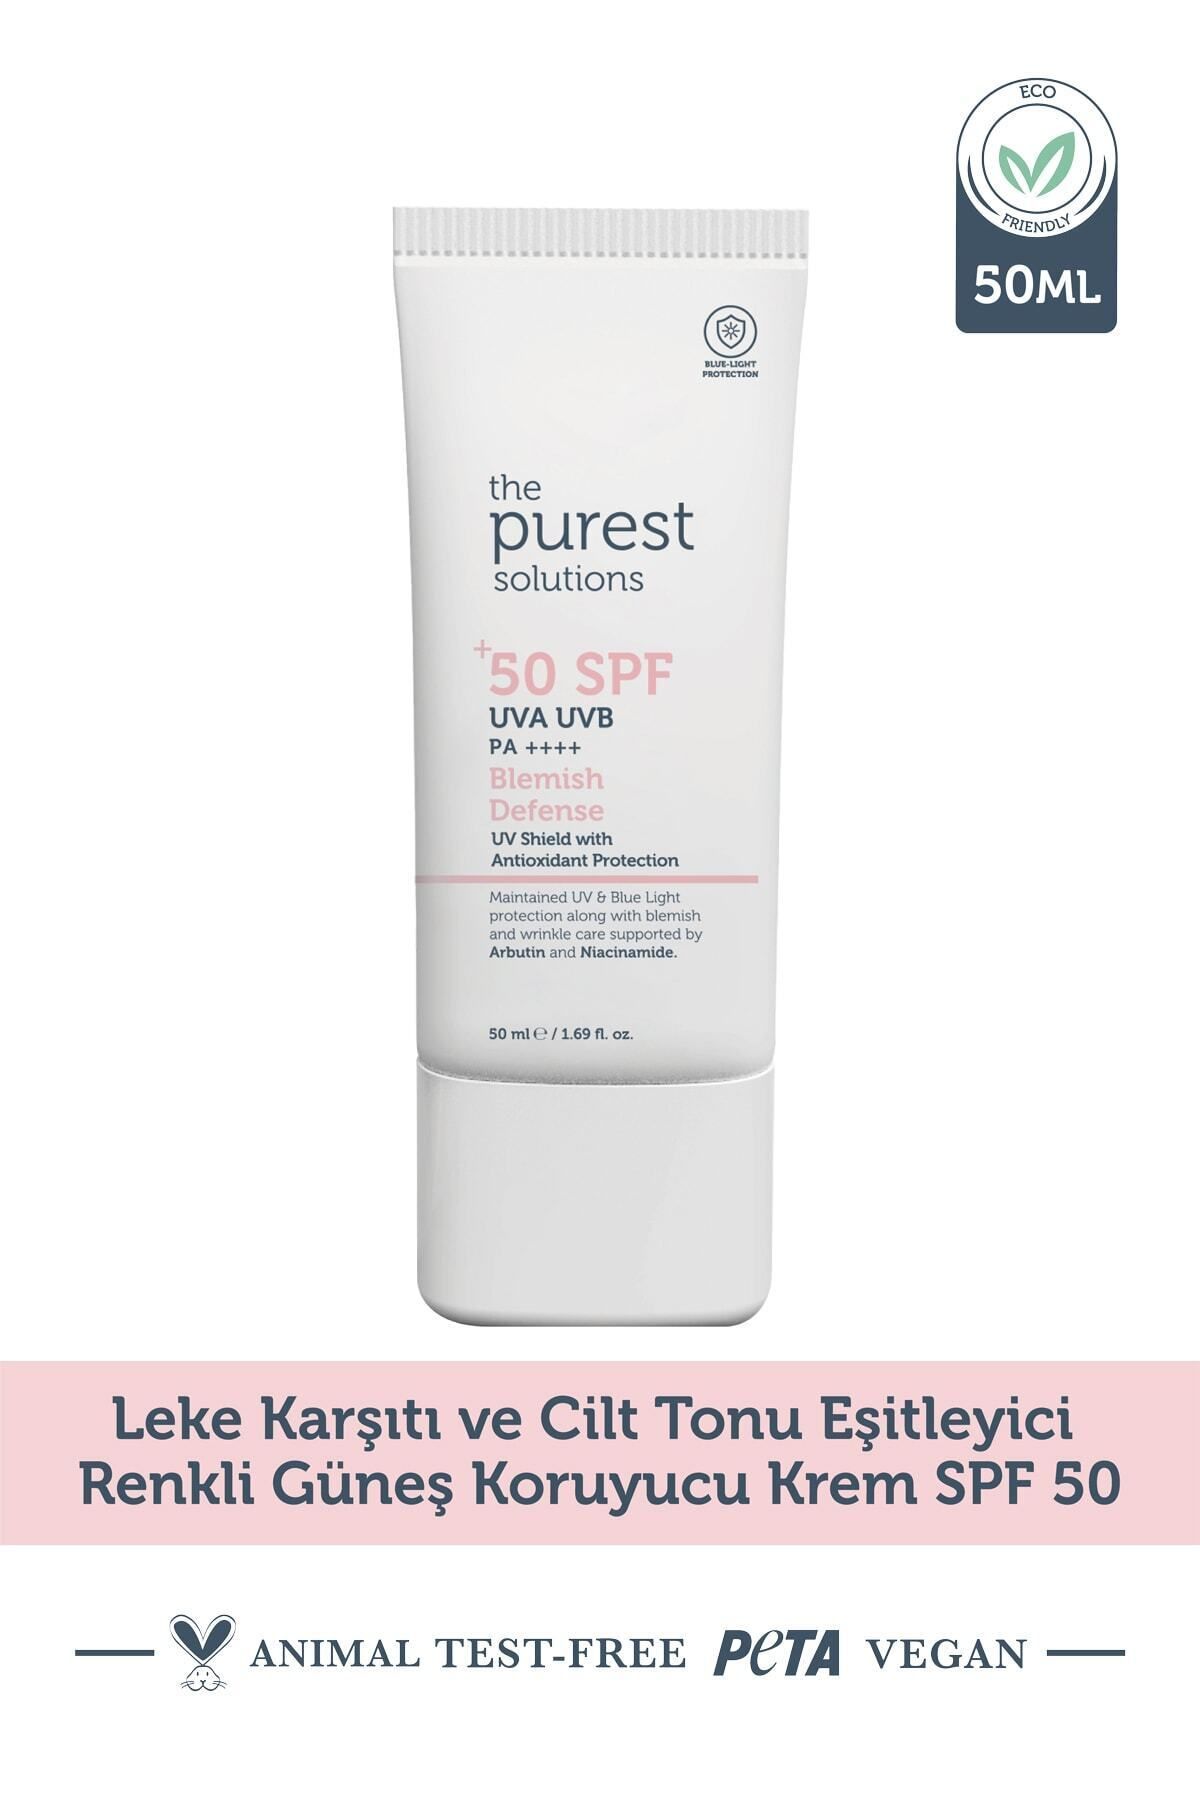 The Purest Solutions ANTİ-BLEMİSH AND SKİN TONE EQUALİZİNG LONG-LASTİNG PROTECTİVE CREAM SPF 50, 50 ML DEMBA4011